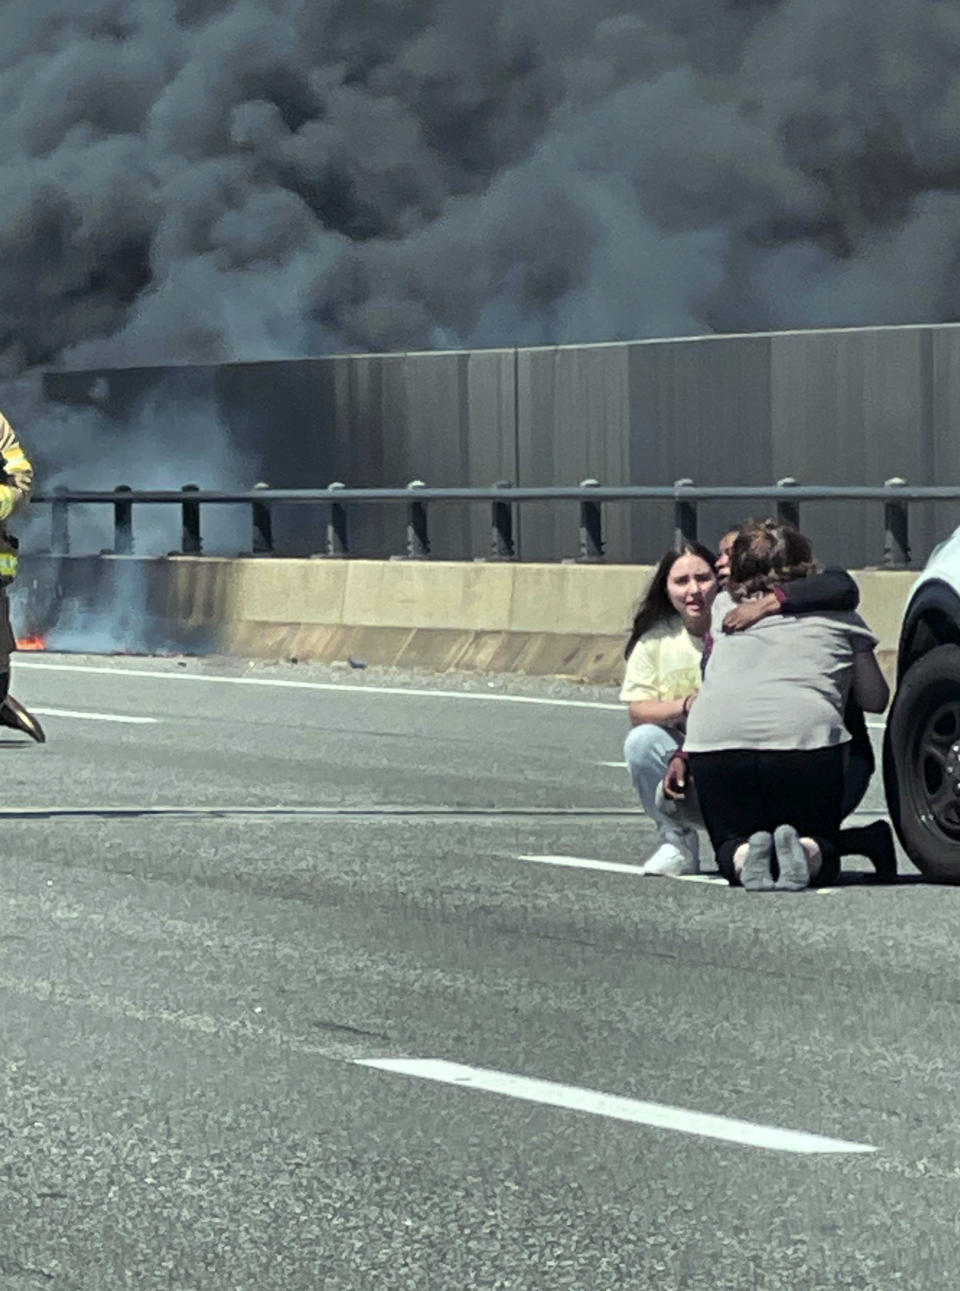 This photo provided by Angelique Feliciano shows people embracing as firefighters and police respond after a crash involving a fuel truck and a car sparked a fire on the Gold Star Bridge between New London and Groton, Conn., on Friday, April 21, 2023. The crash closed Interstate 95 in both directions during the blaze. (Angelique Feliciano via AP)